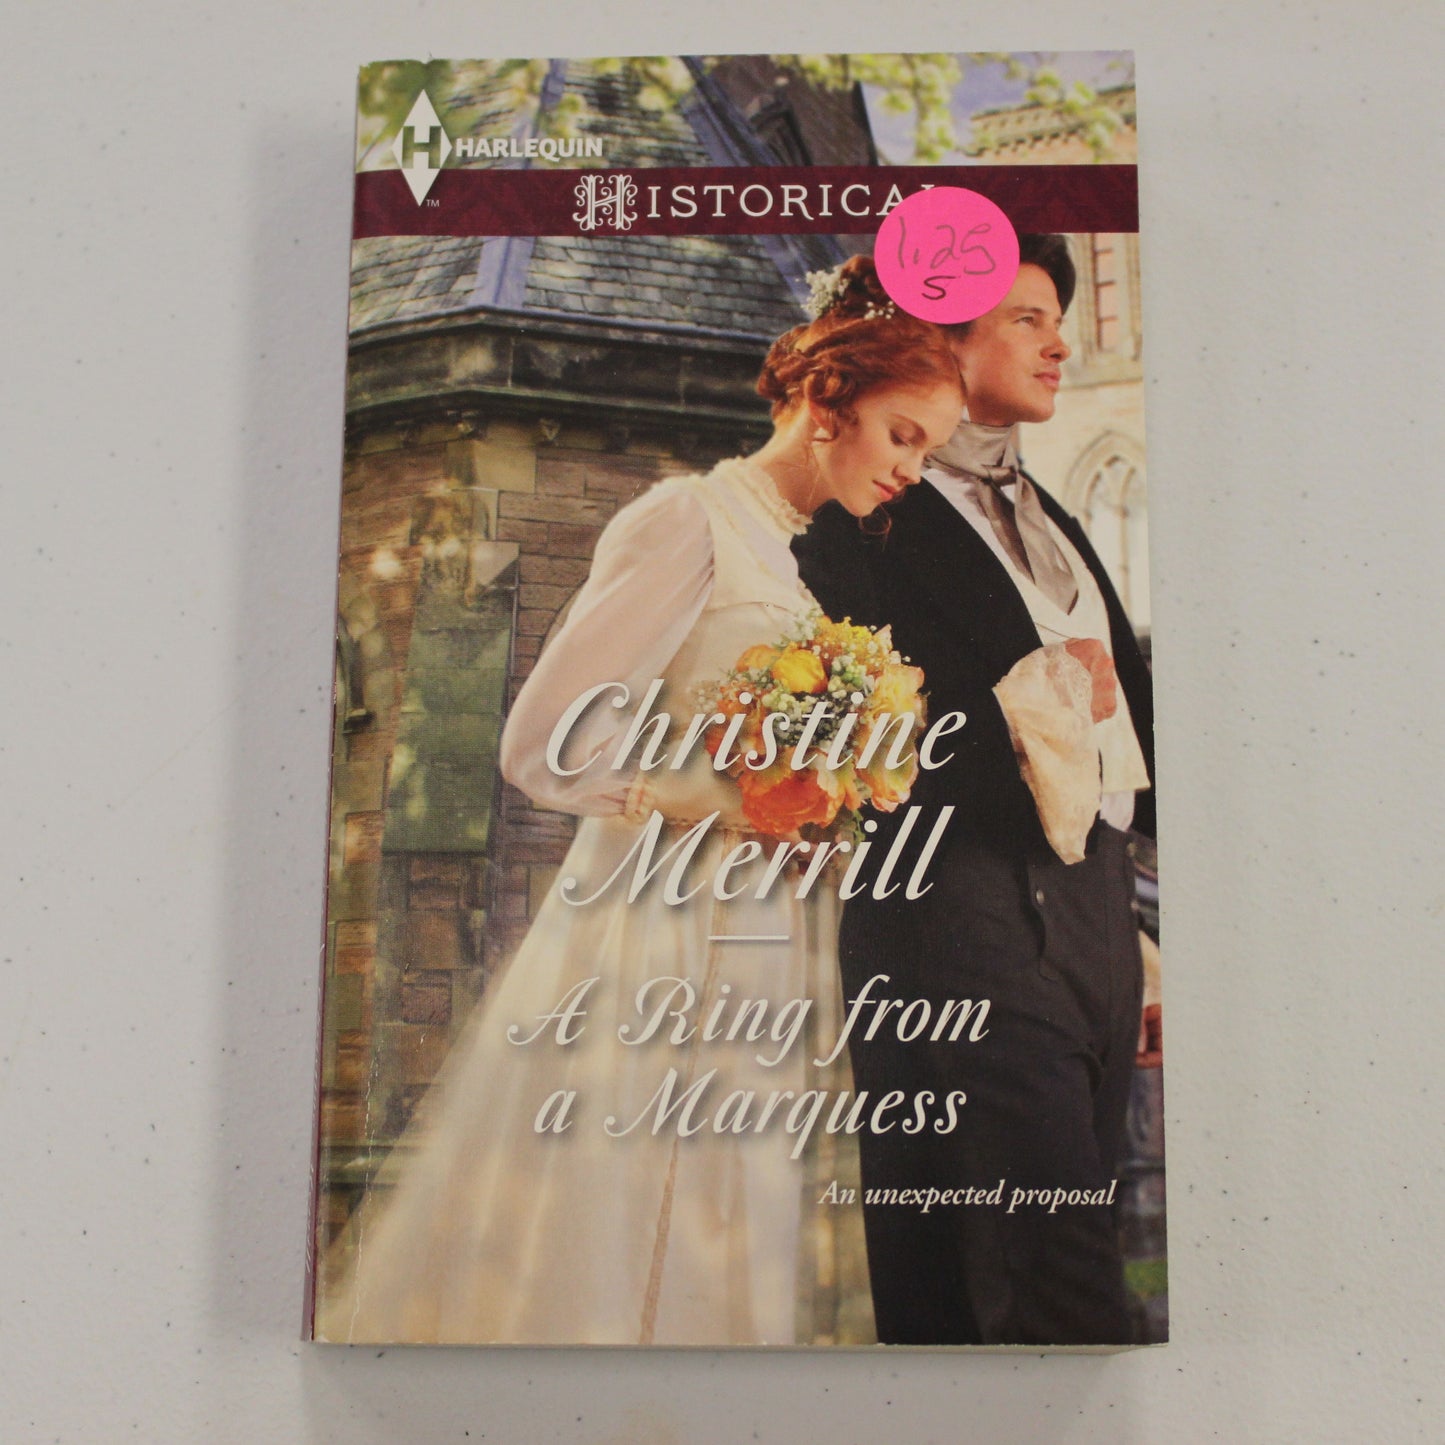 HARLEQUIN: A RING FROM A MARQUESS